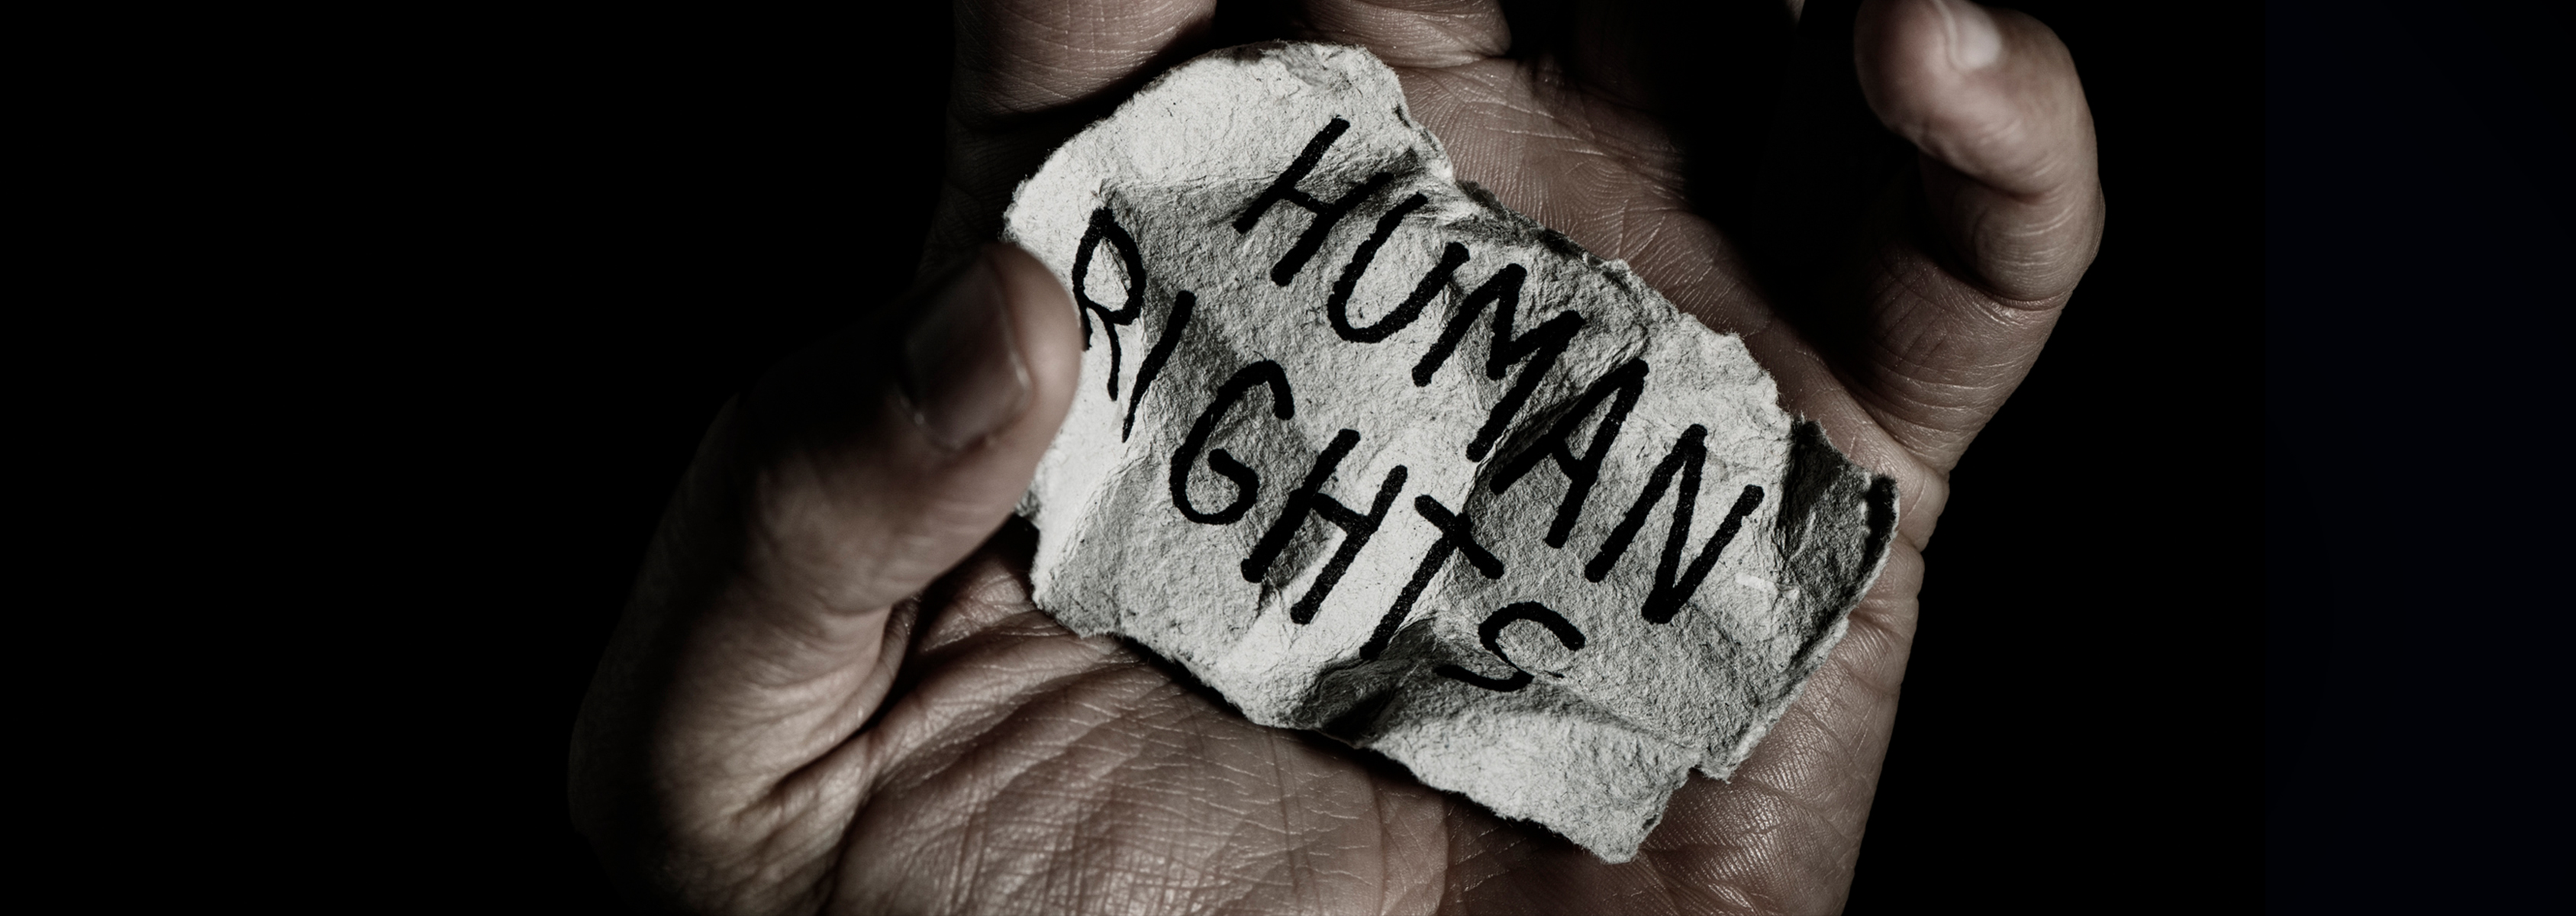 Hand holding paper with Human Rights on it